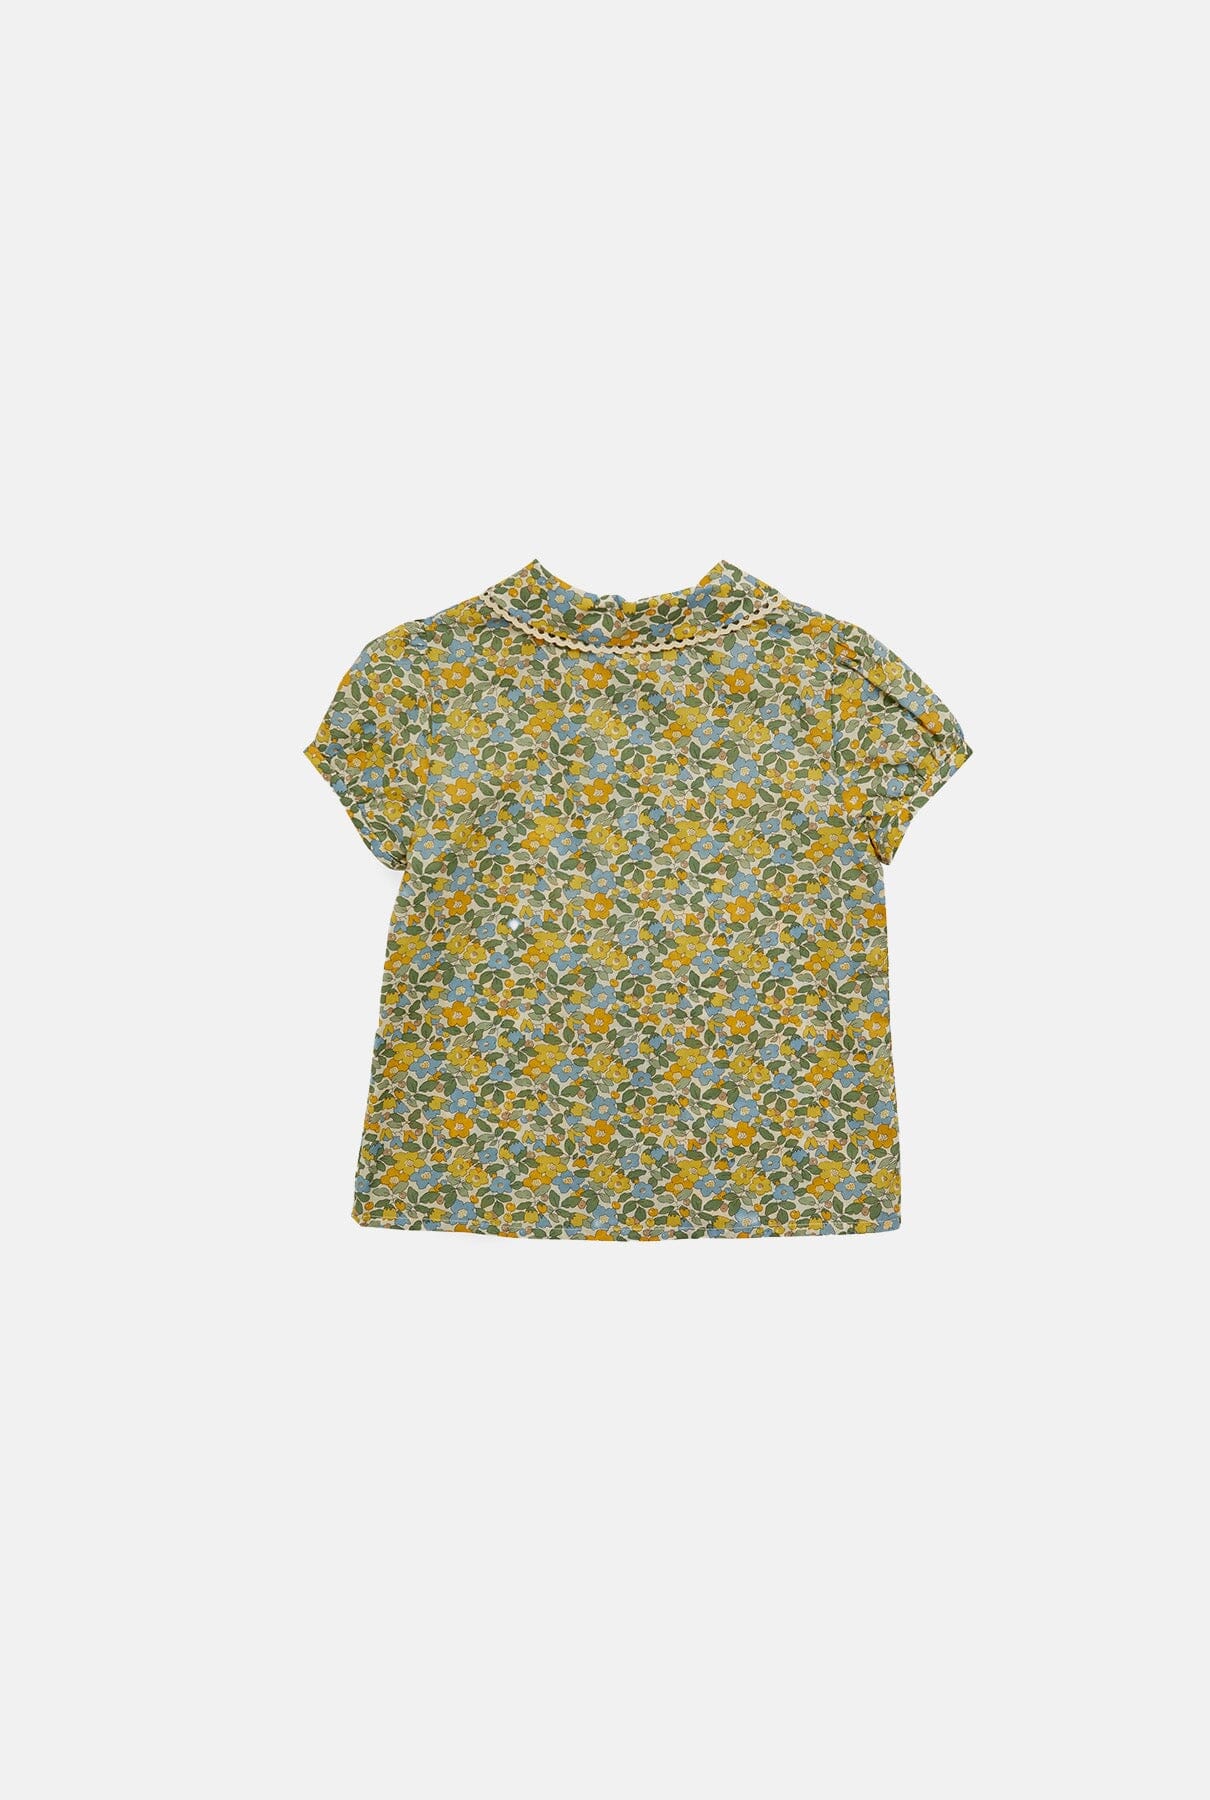 Coline Blouse Betsy Berry Liberty Kids Clothing Amaia London 